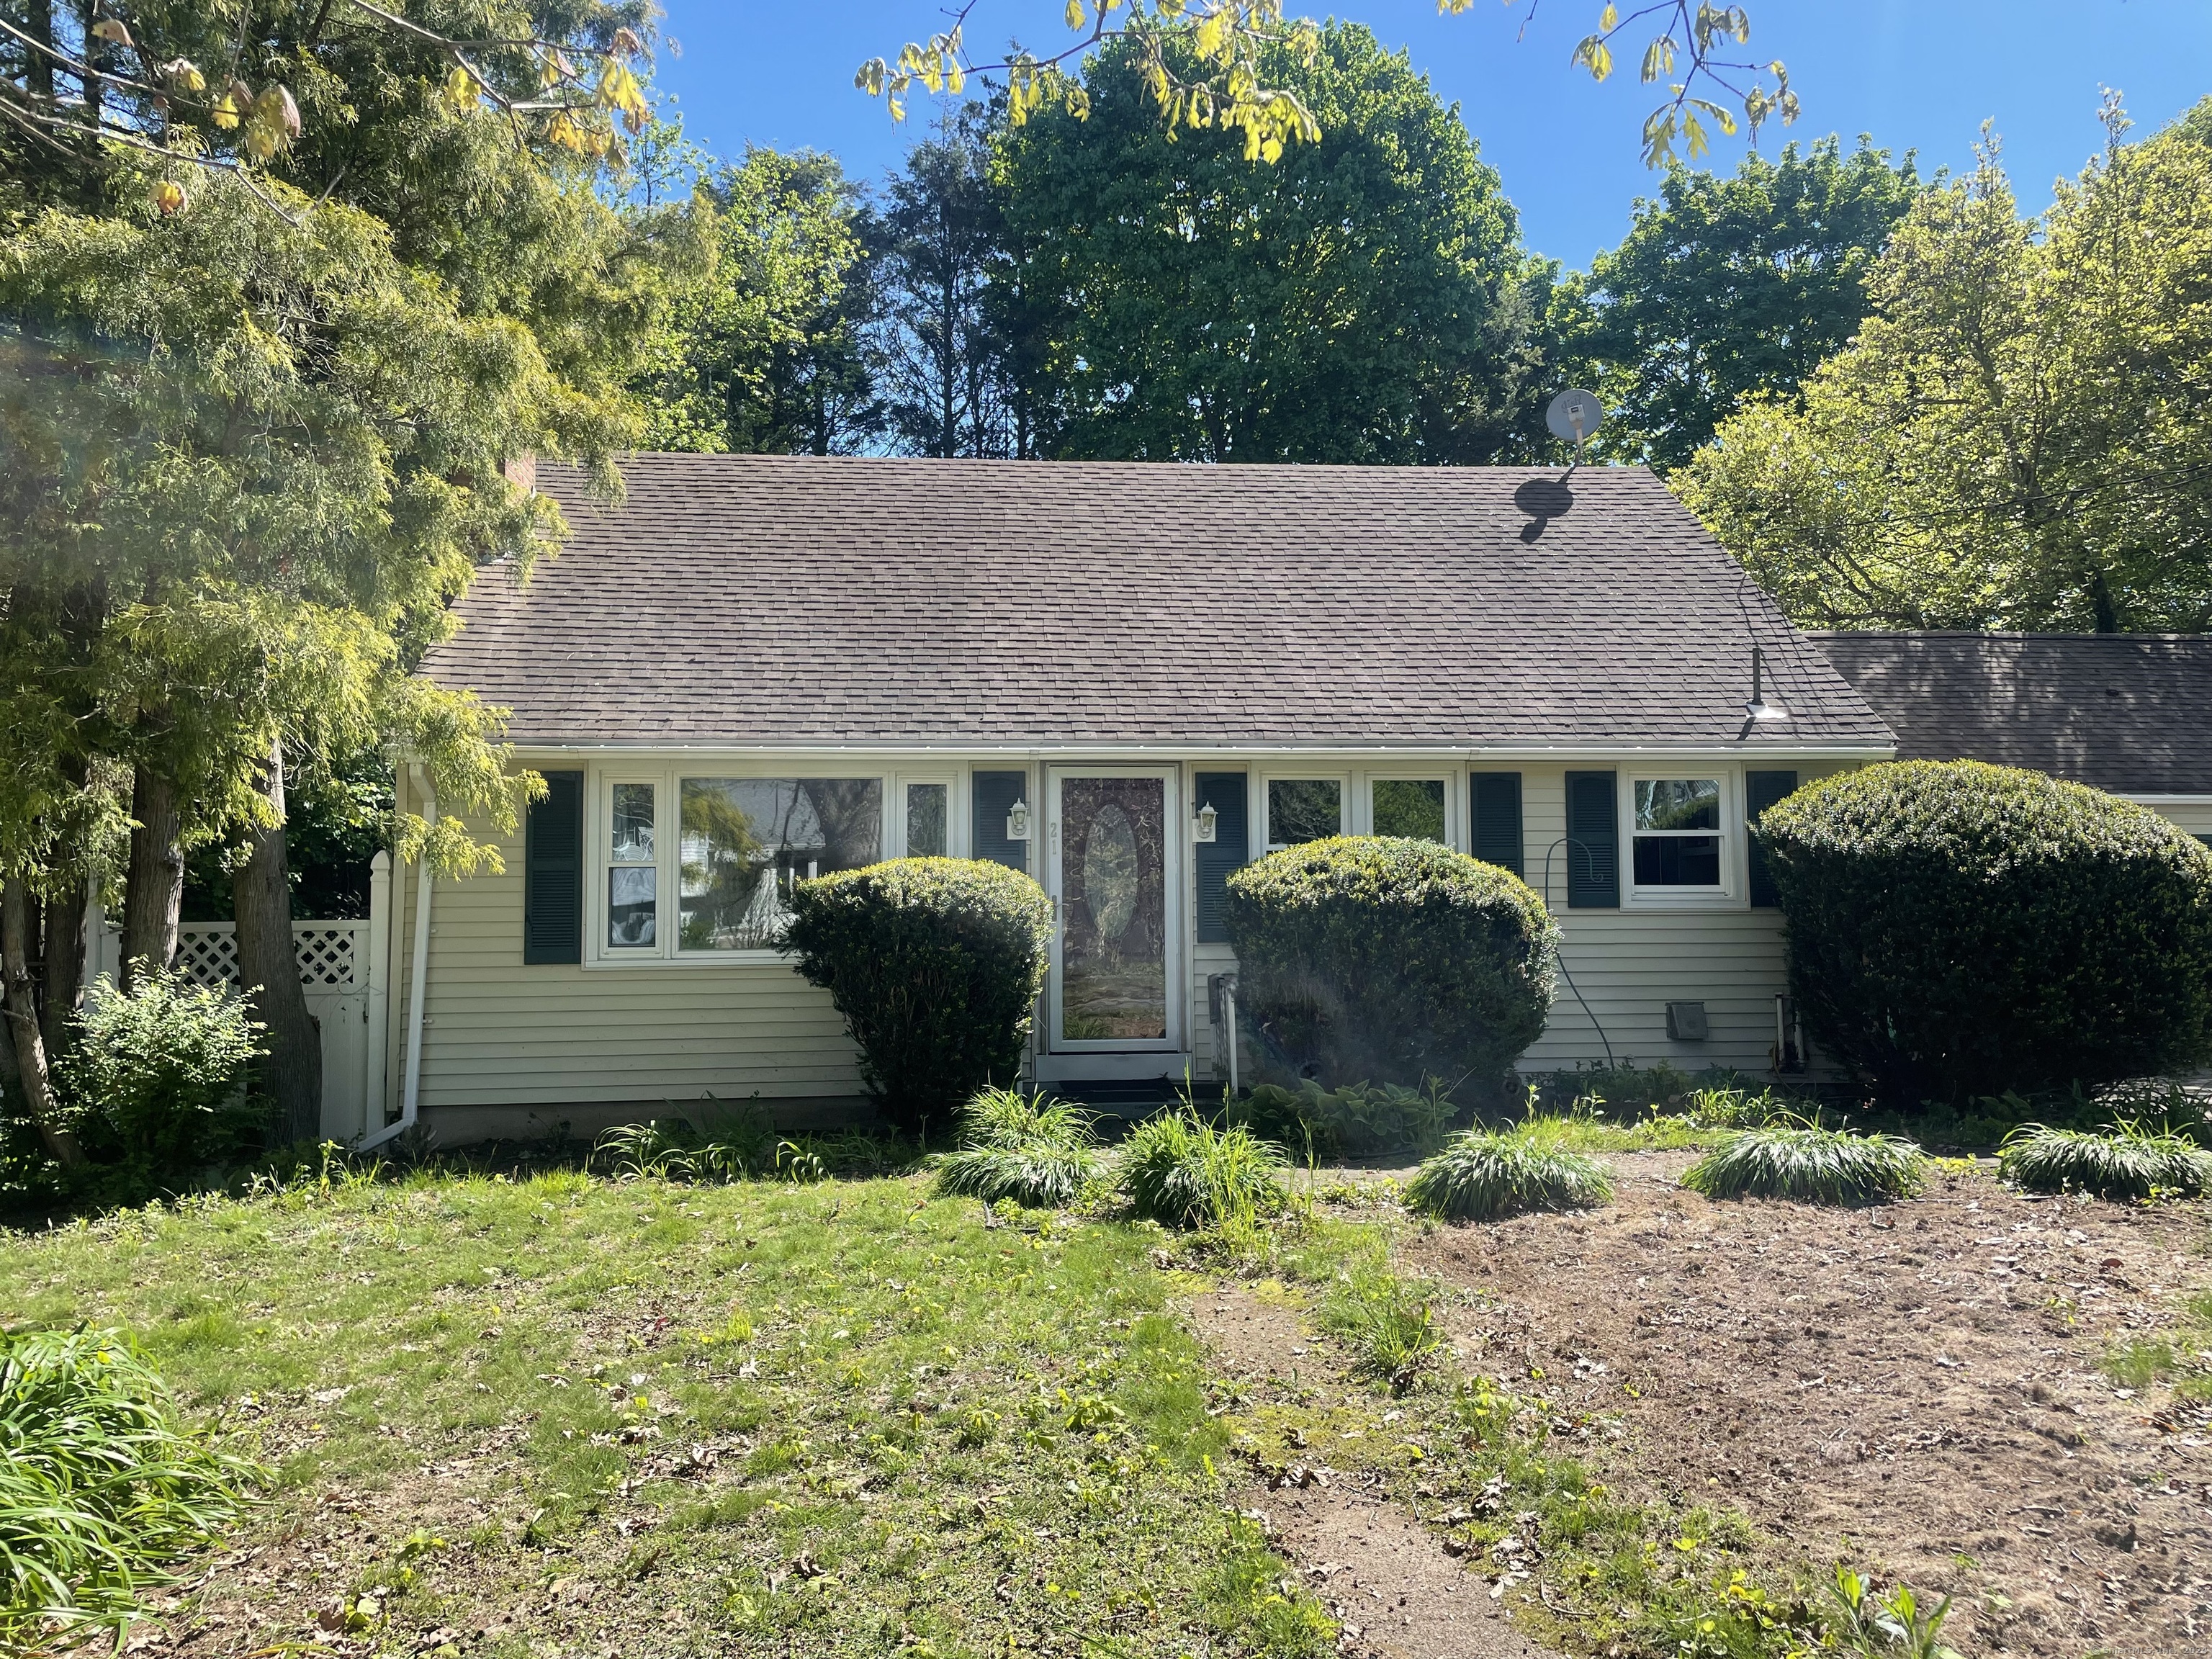 21 Maple Road, Waterford, Connecticut - 4 Bedrooms  
3 Bathrooms  
8 Rooms - 